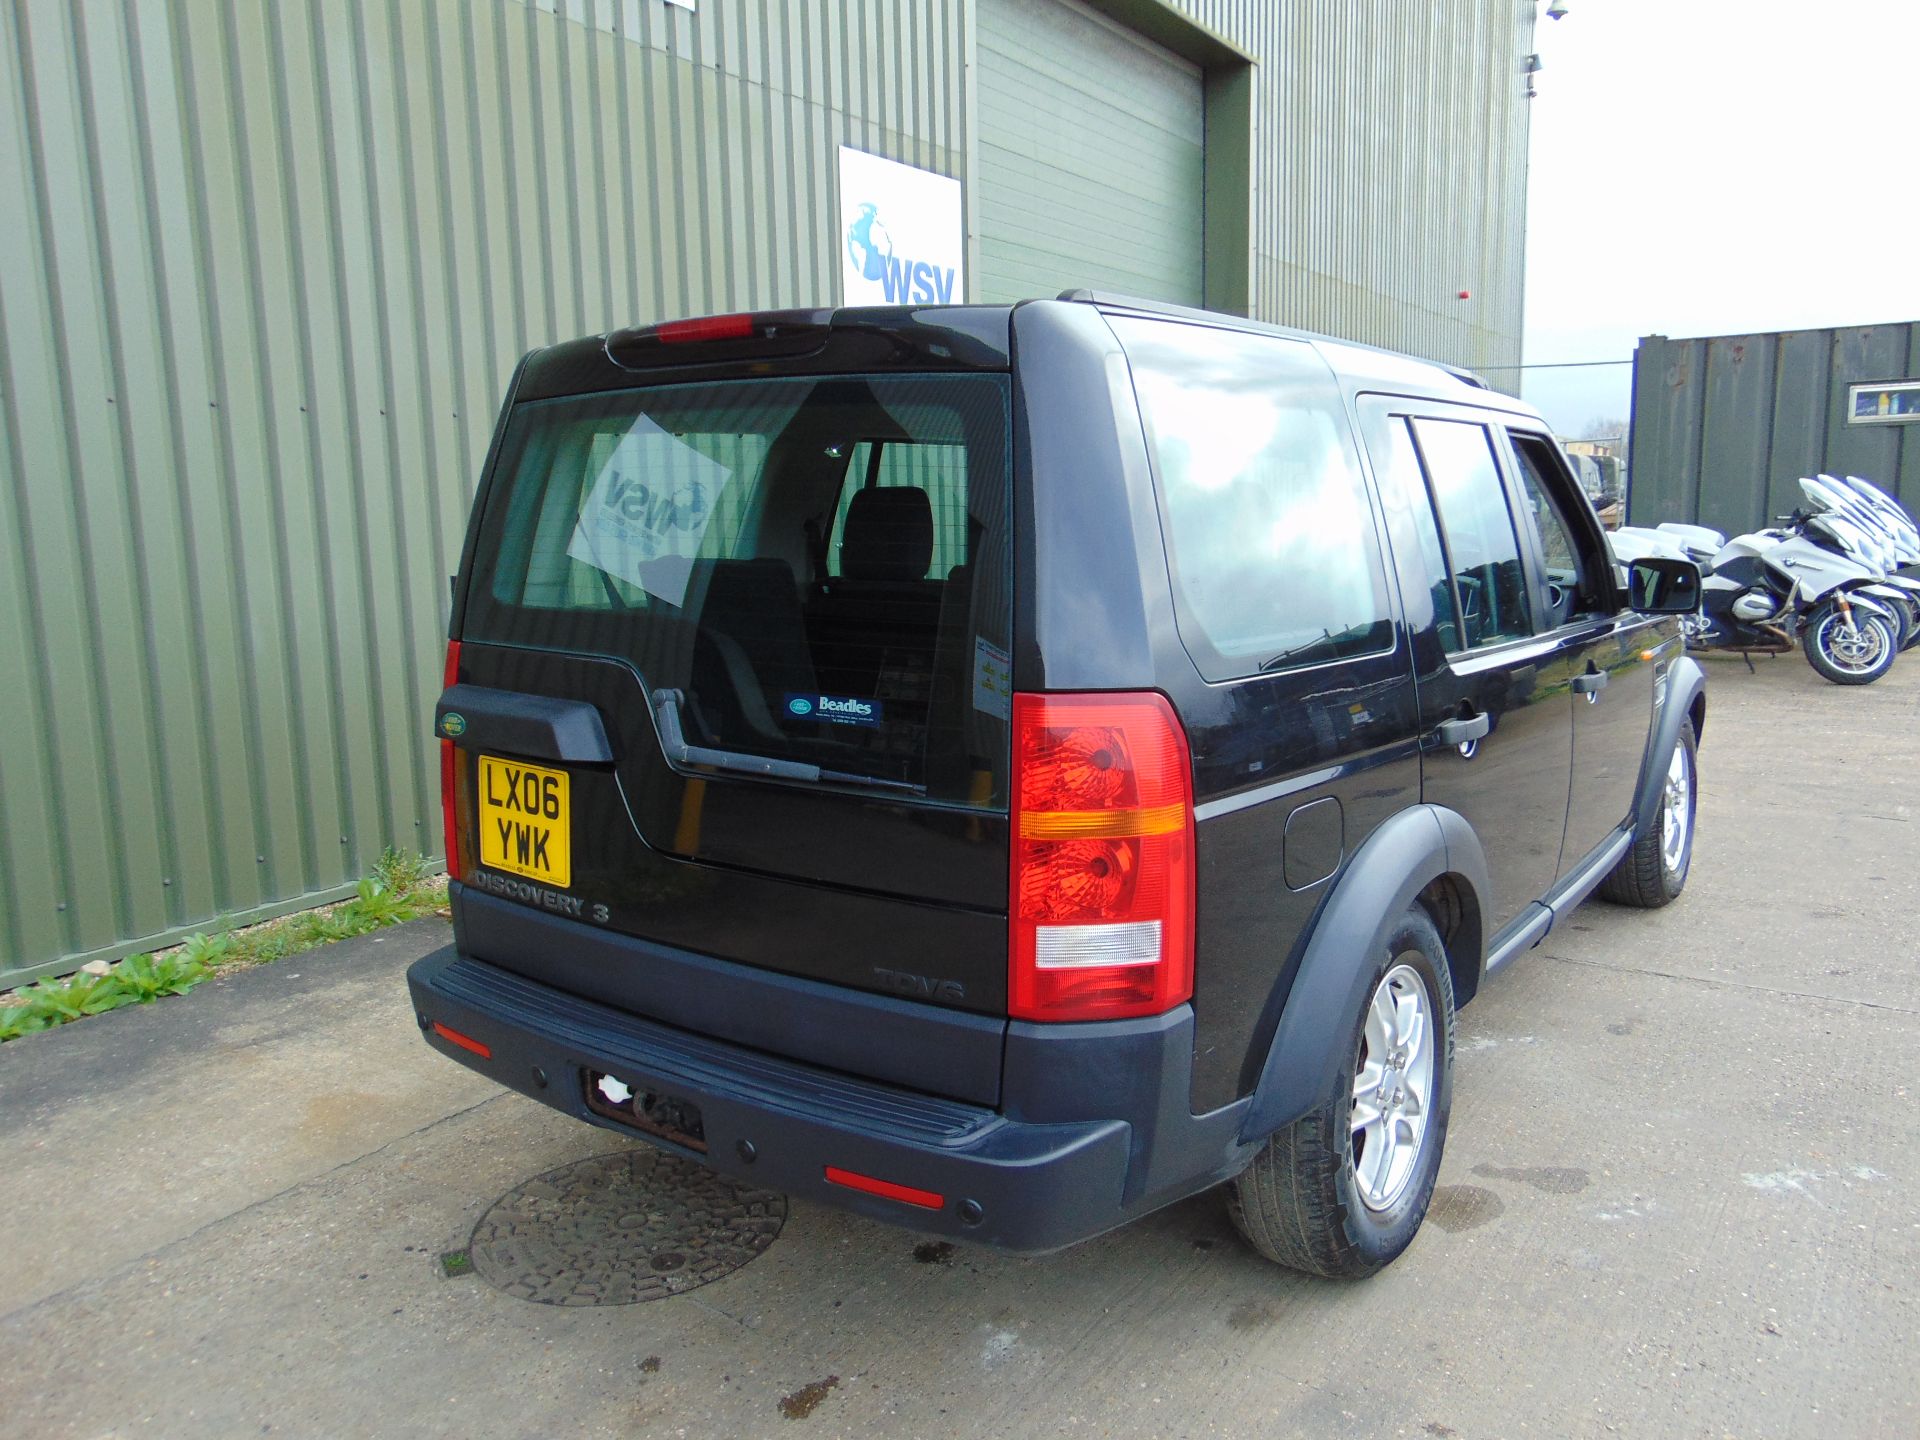 2006 Land Rover Discovery 3 TDV6 2.7 Ltr Auto - 4WD - 5 dr 7 Seater - Black - Image 4 of 49